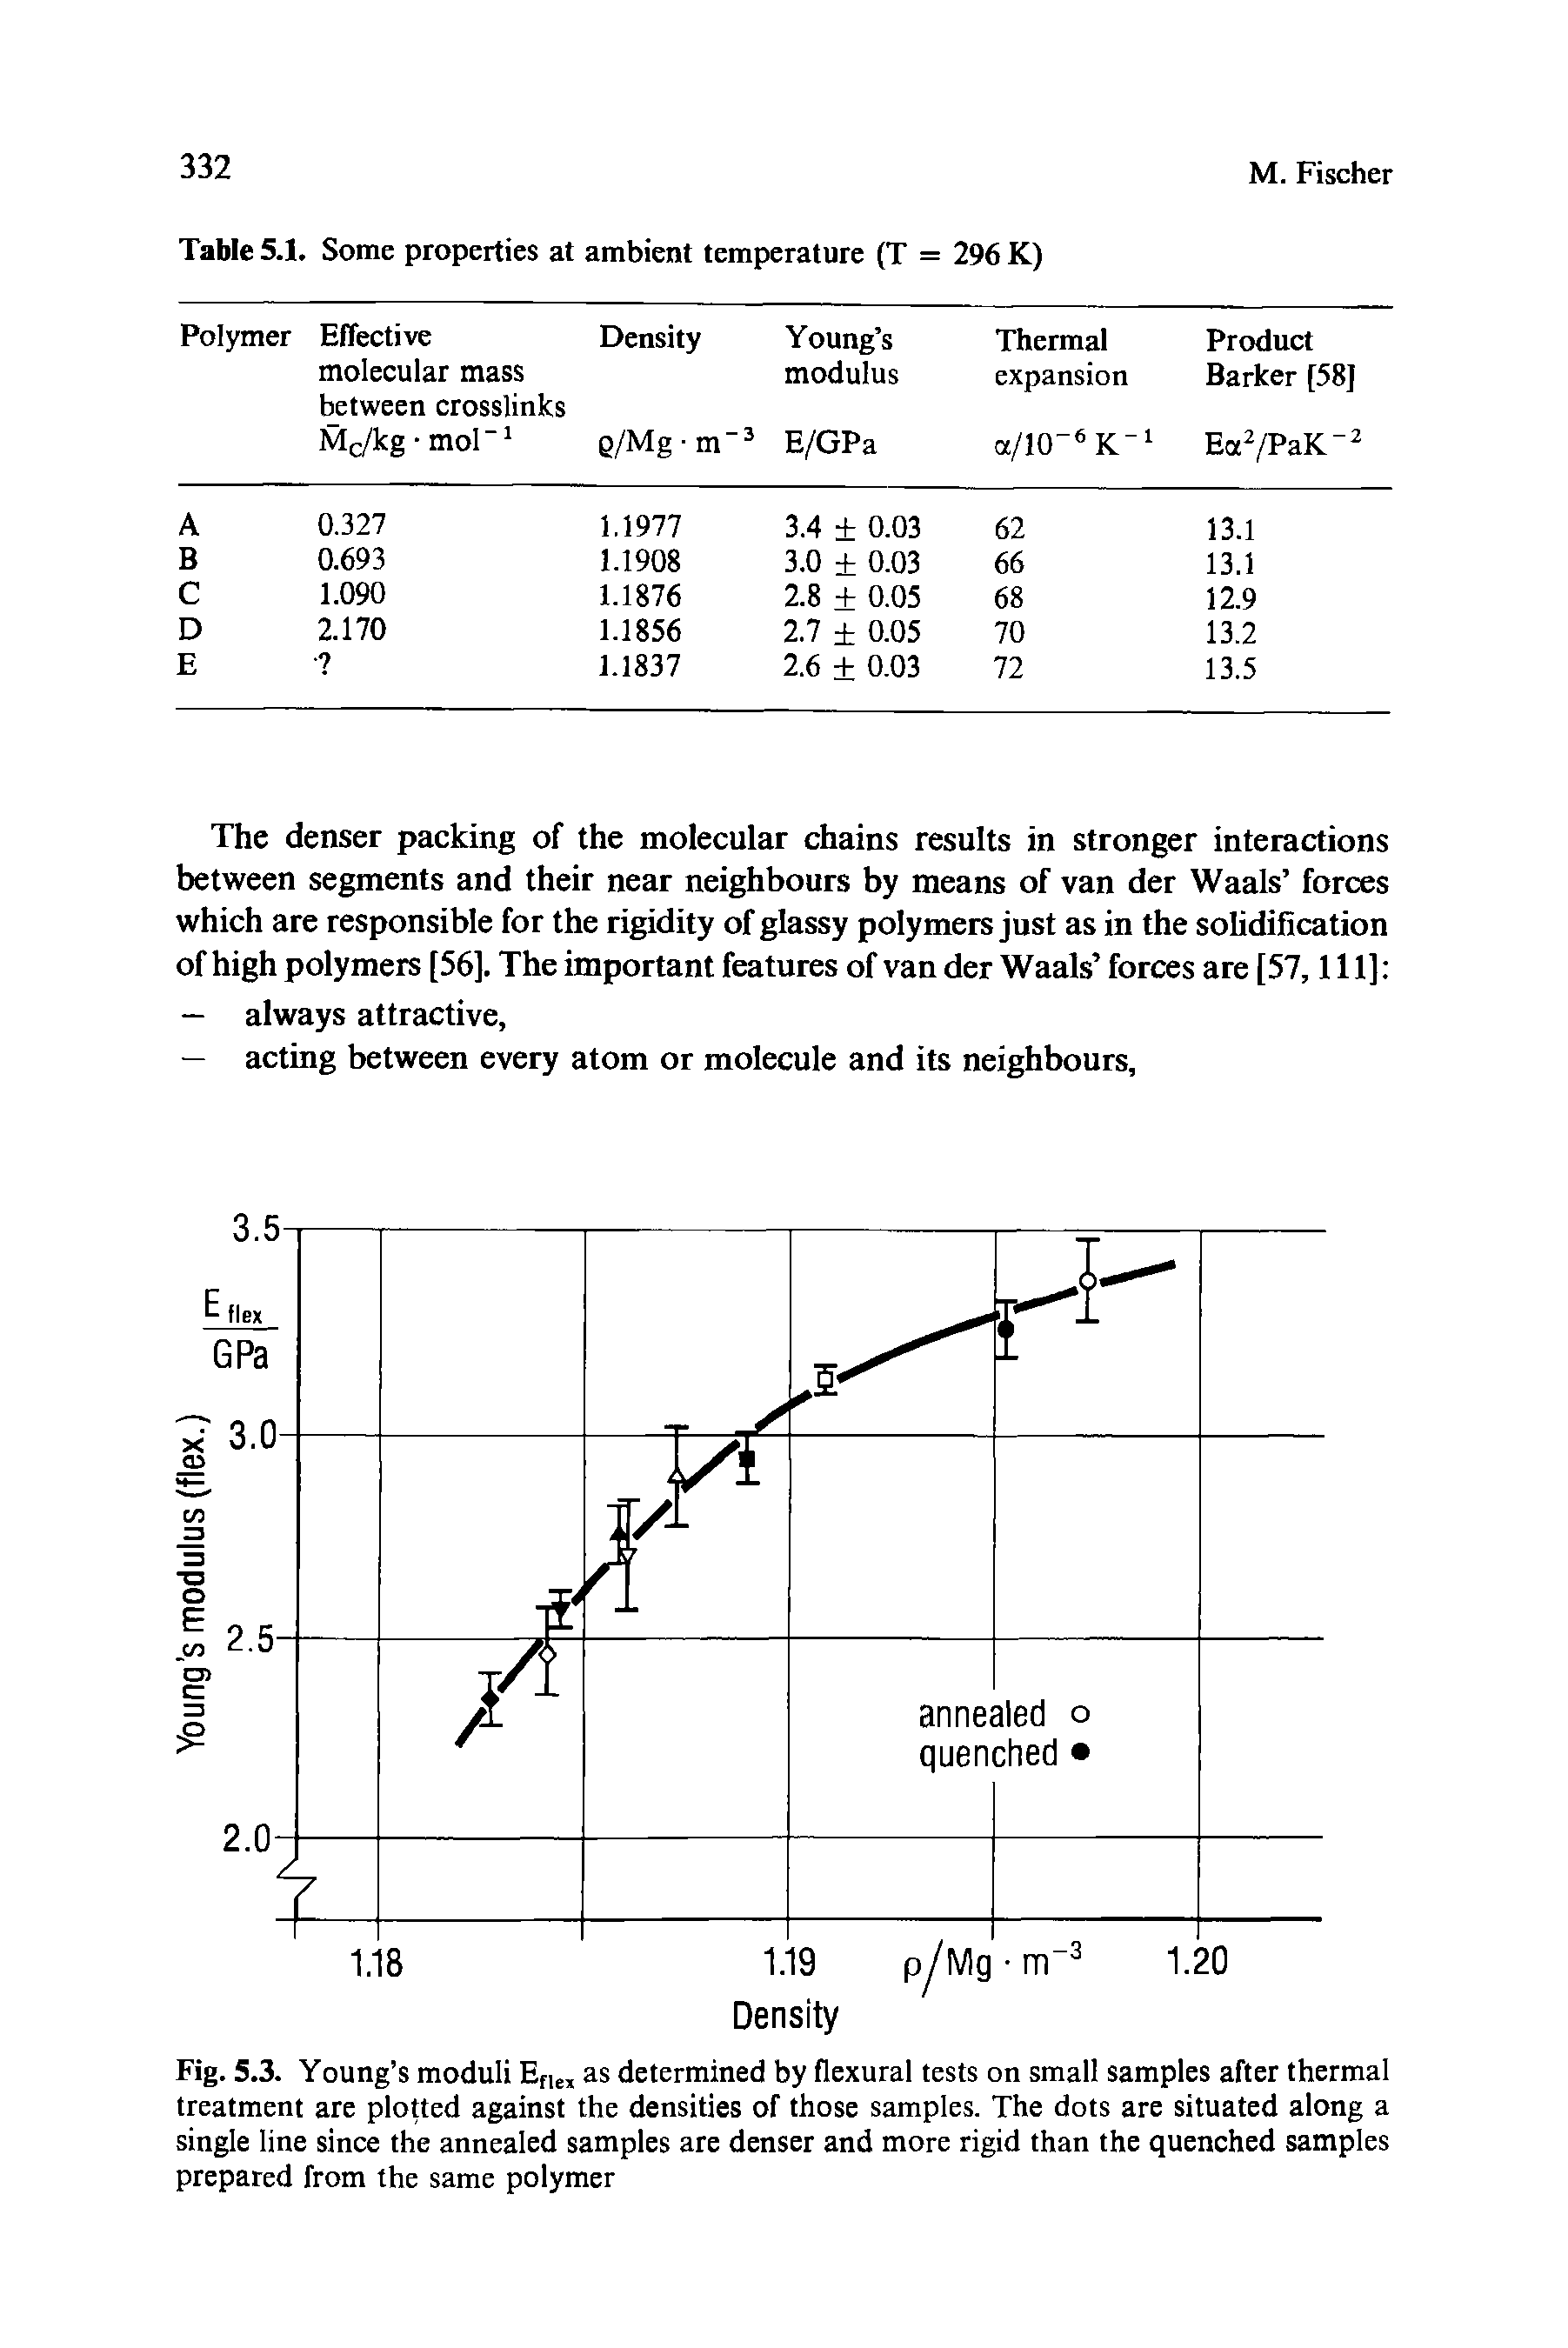 Fig. 5.3. Young s moduli Efle, as determined by flexural tests on small samples after thermal treatment are plotted against the densities of those samples. The dots are situated along a single line since the annealed samples are denser and more rigid than the quenched samples prepared from the same polymer...